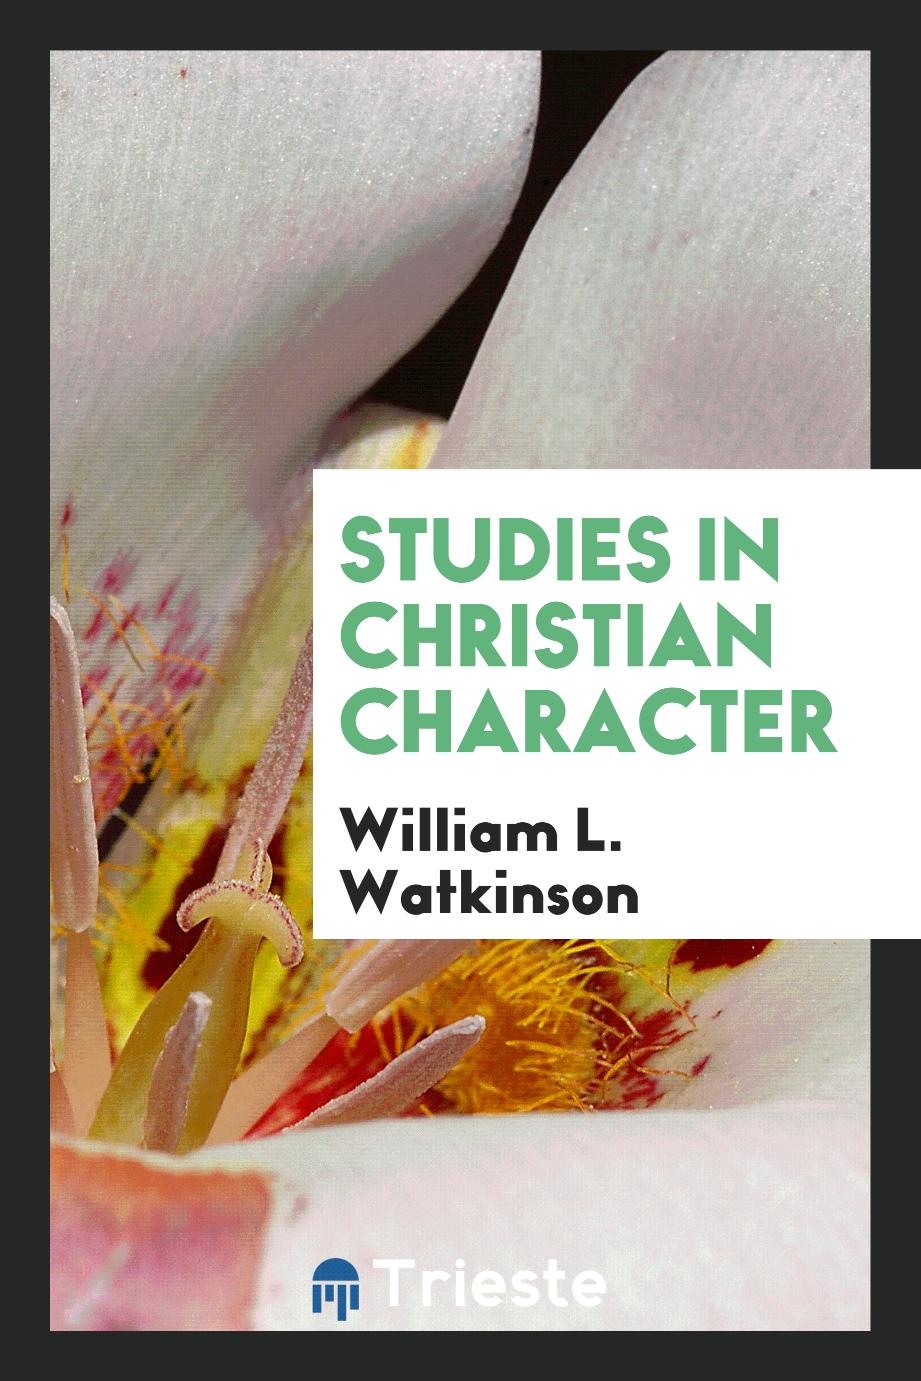 Studies in Christian character